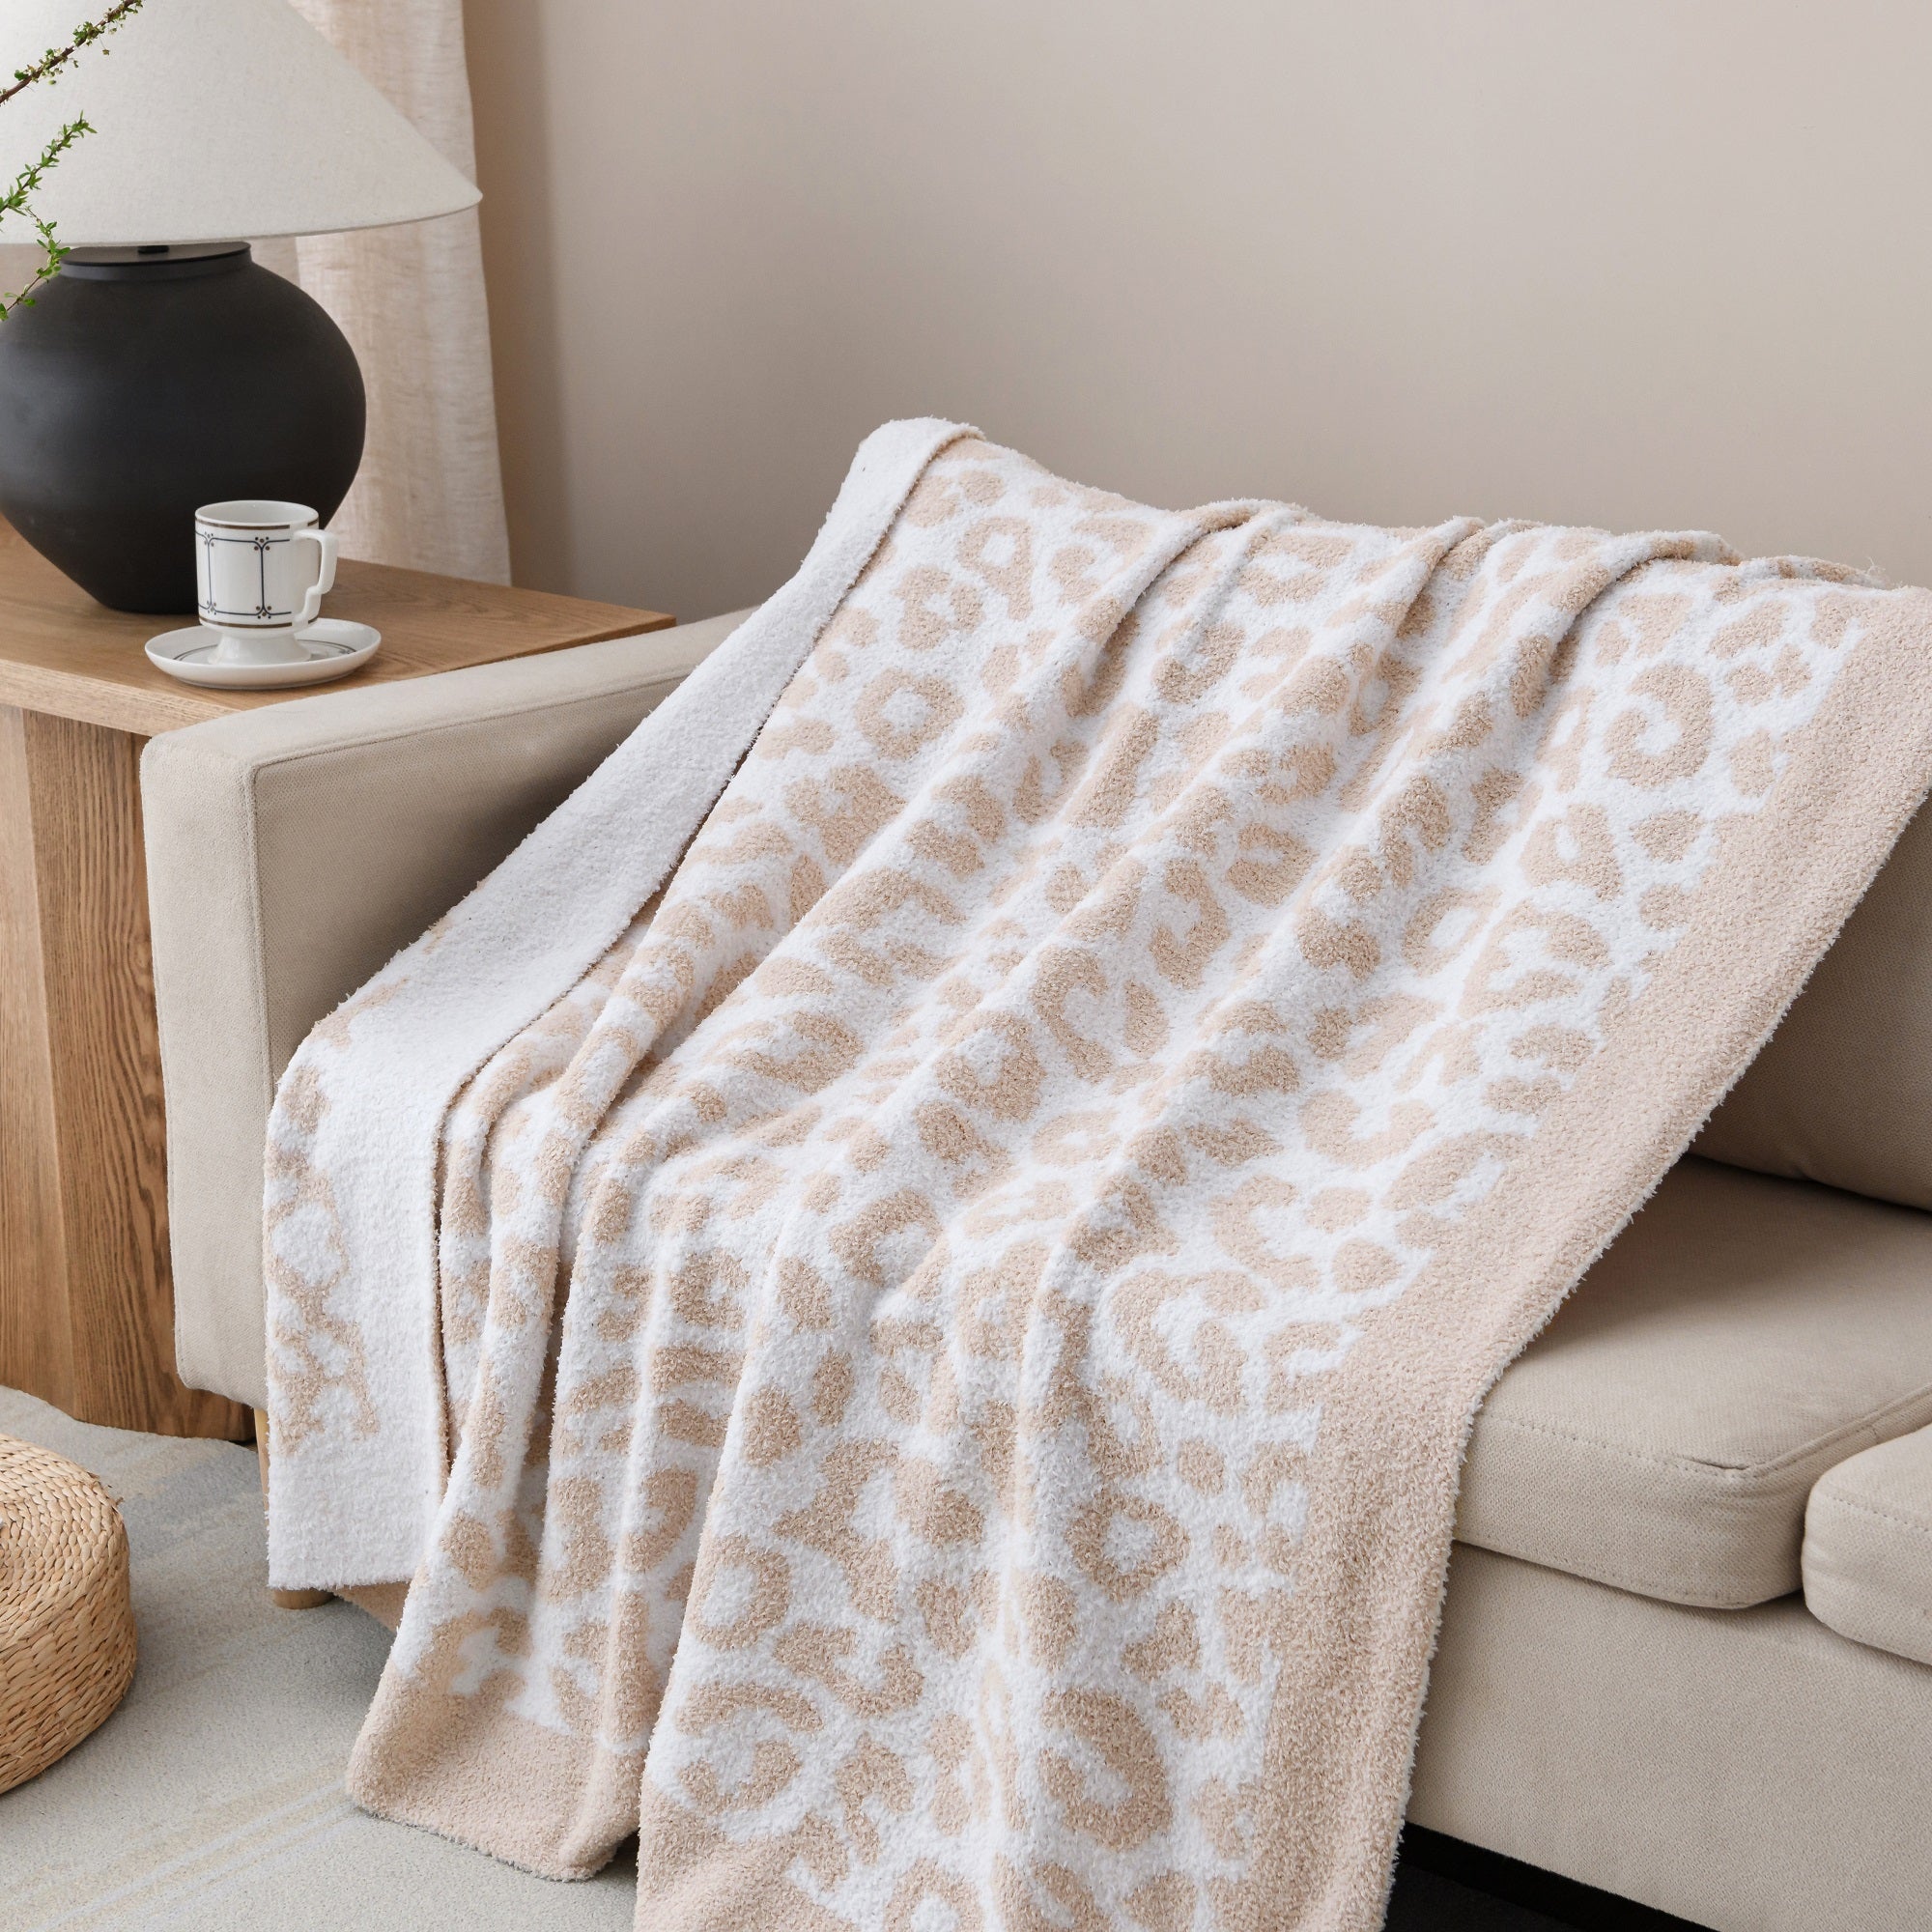 Jacquard Knit Throw Throw Blanket 50 x 60 inches Taupe Leopard